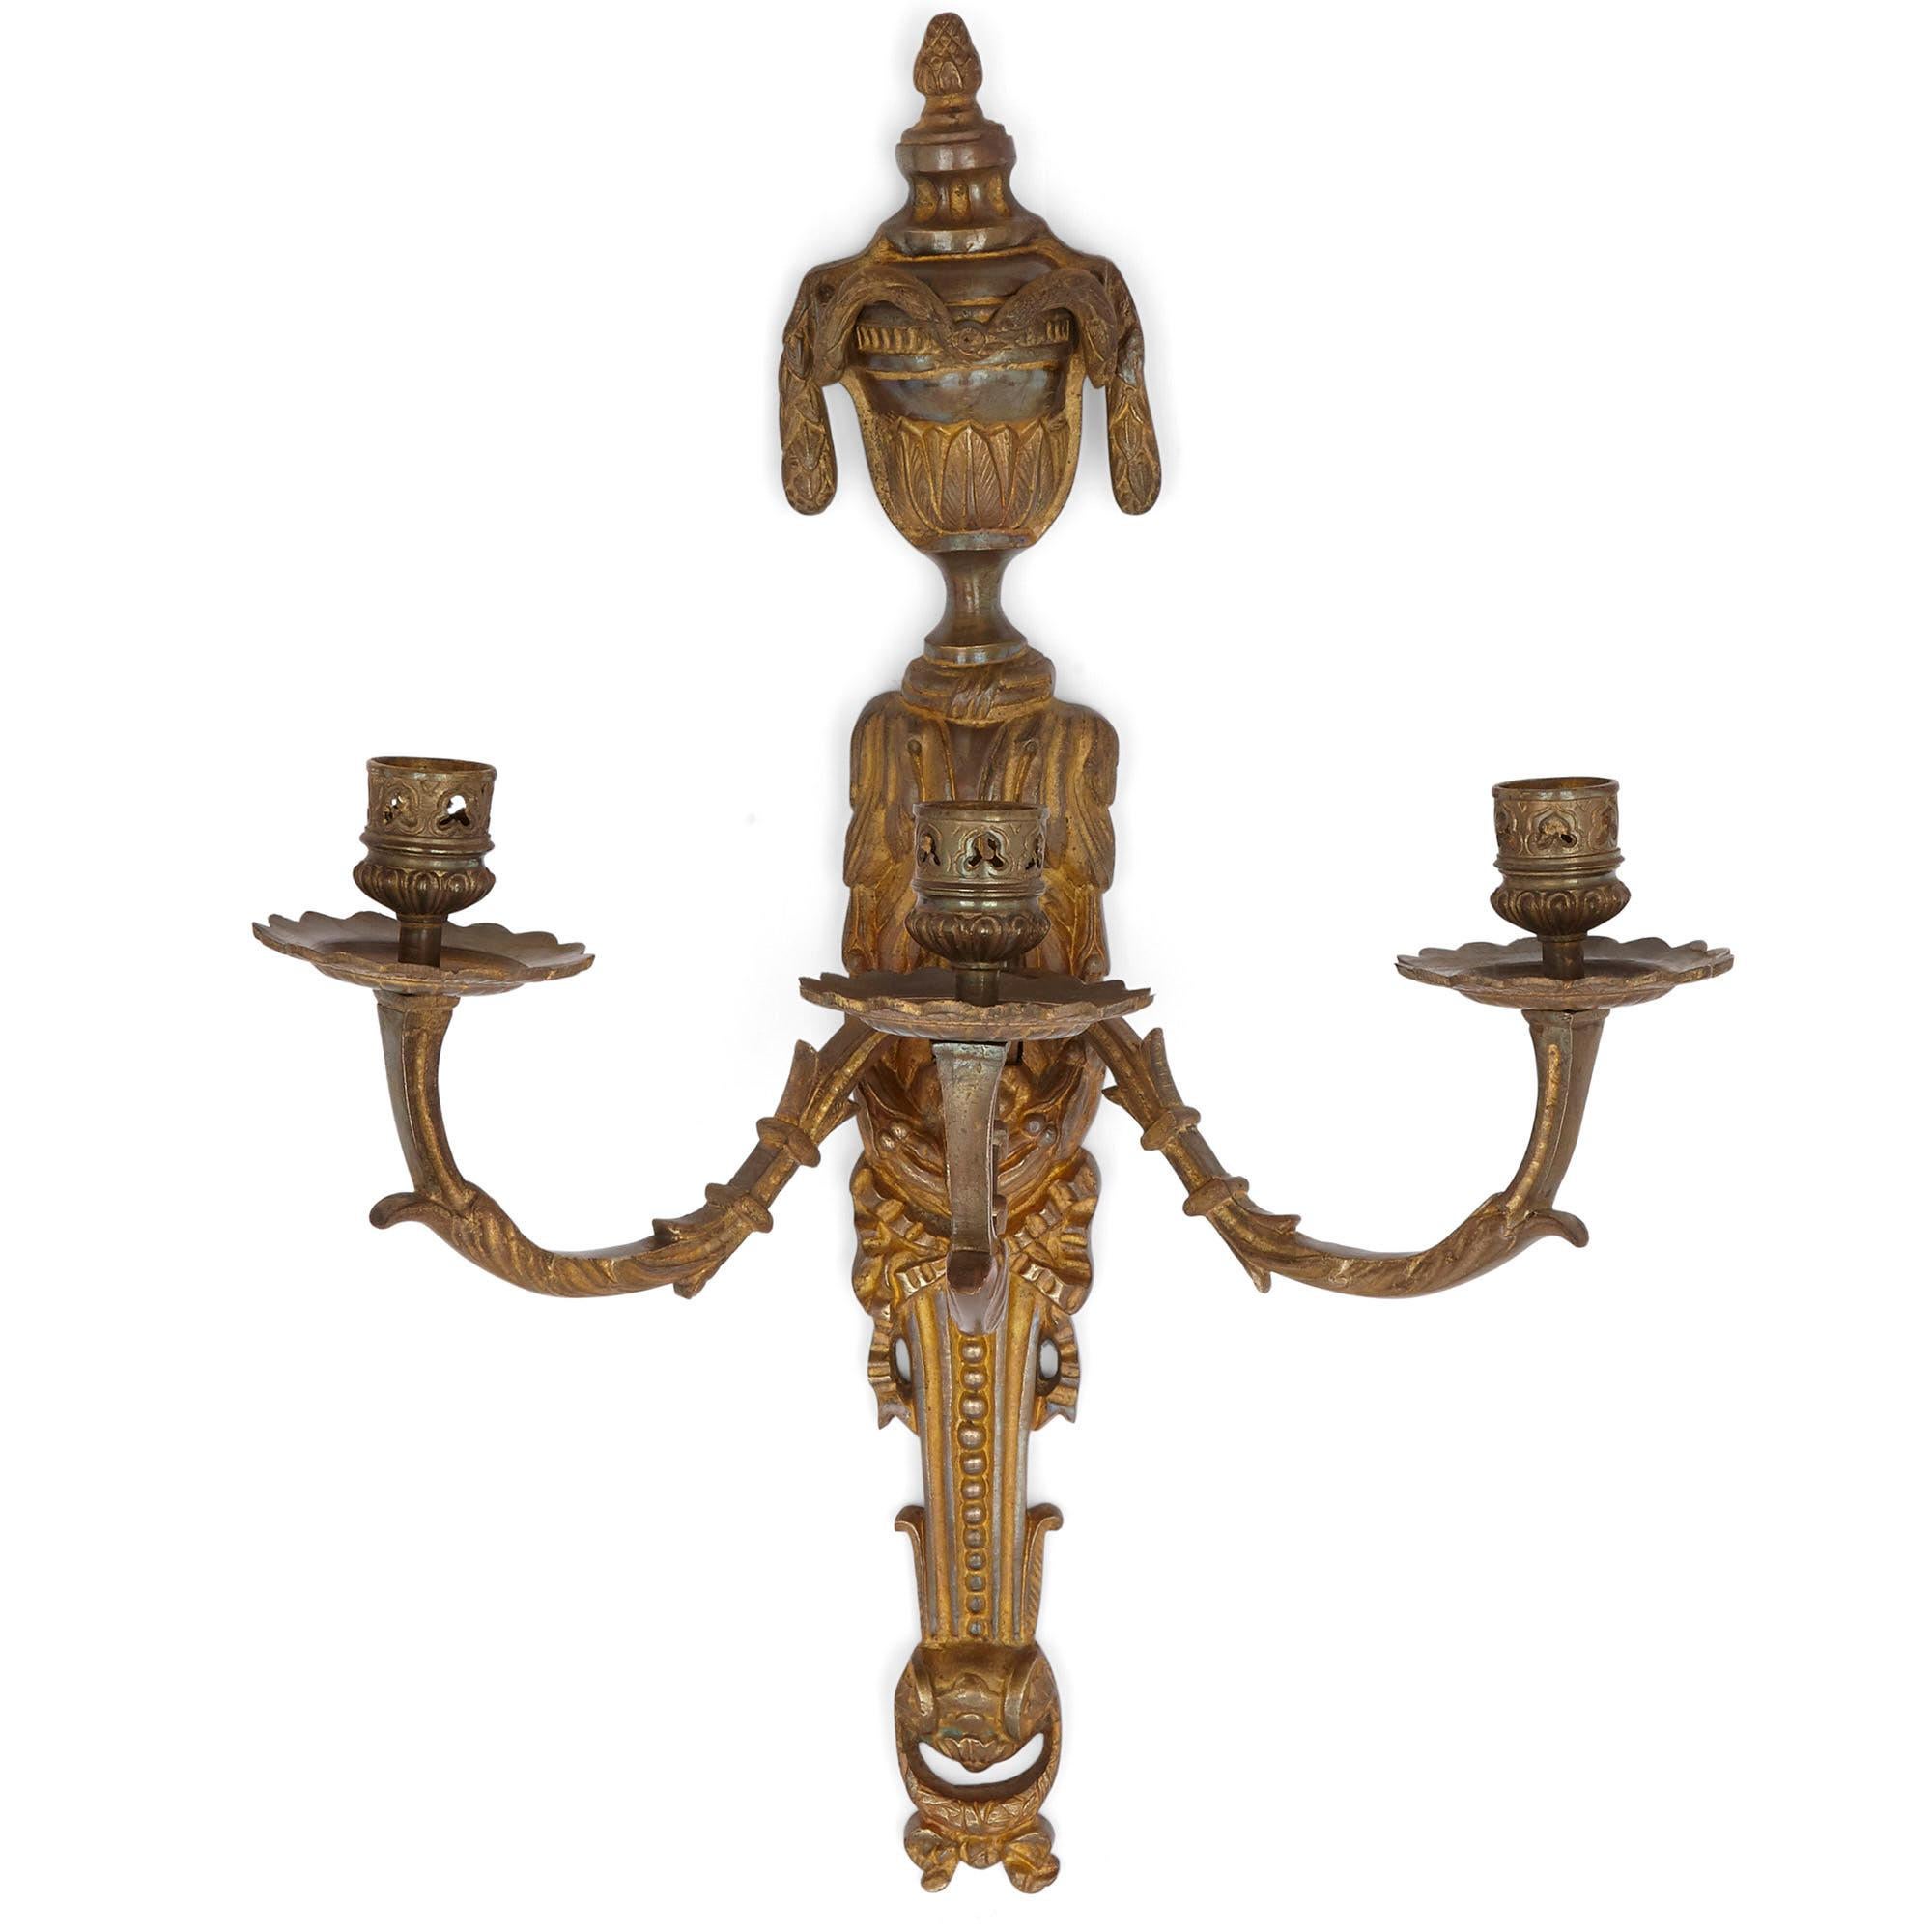 Pair of neoclassical style gilt bronze sconces
French, 19th century
Measures: Height 46cm, width 33cm, depth 23cm

This pair of gilt bronze scones is a fine example of the Louis XVI style. Each scone supports three light branches, each branch